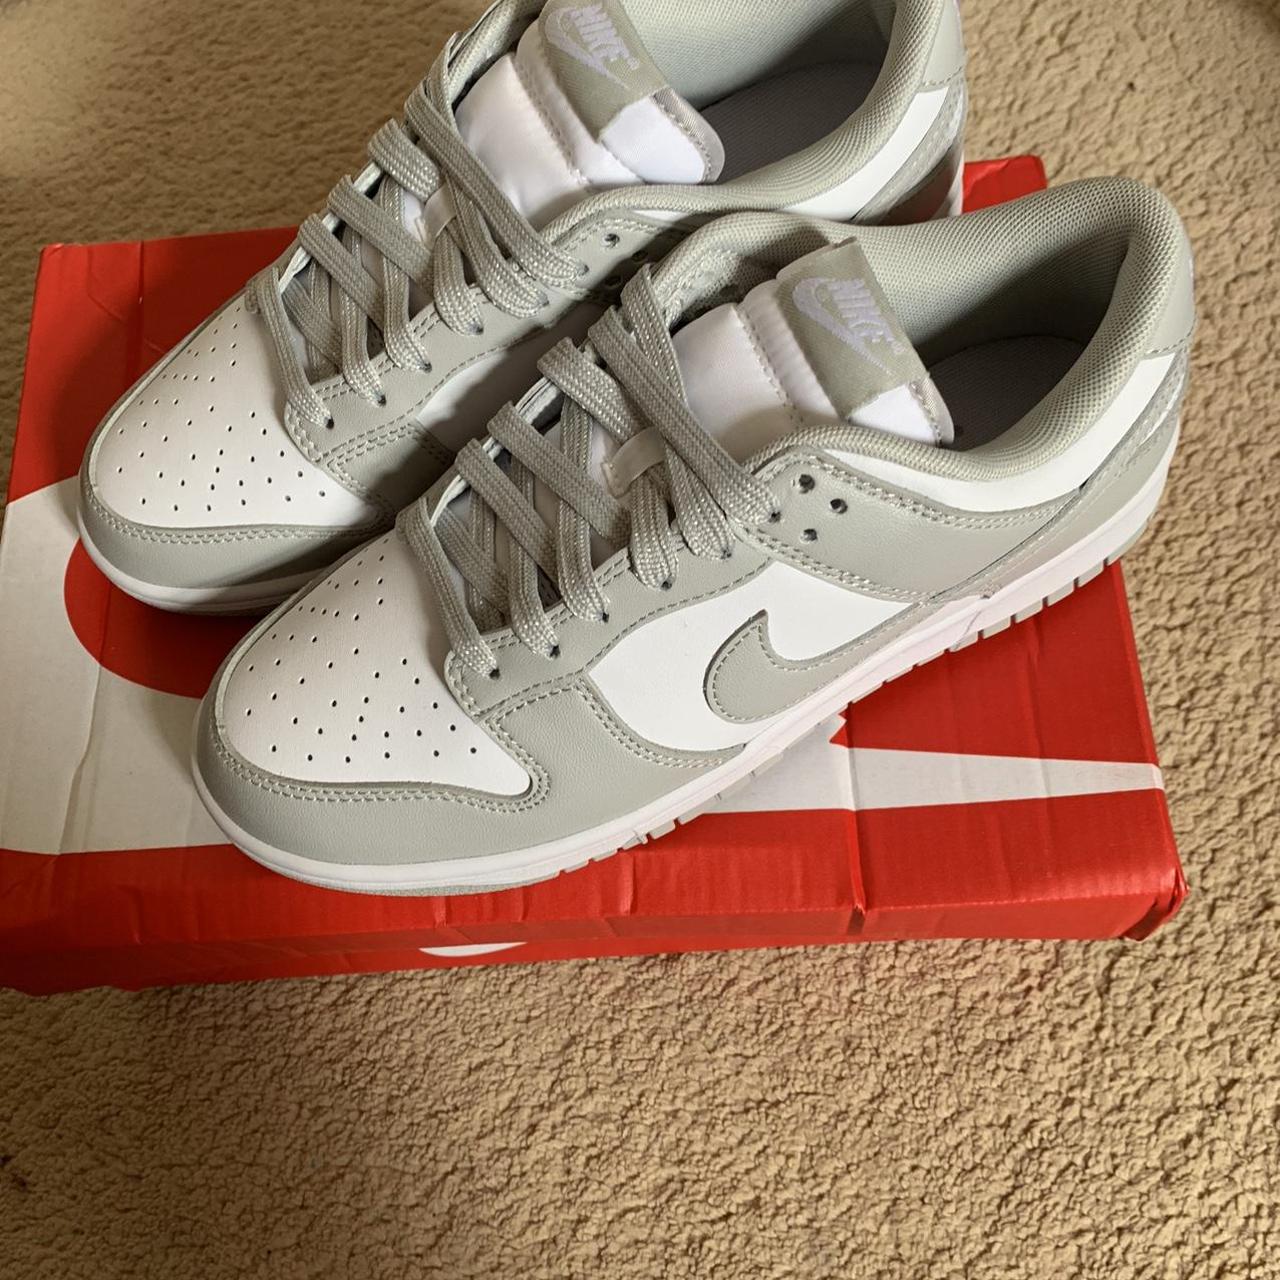 Nike Men's White and Grey Trainers | Depop